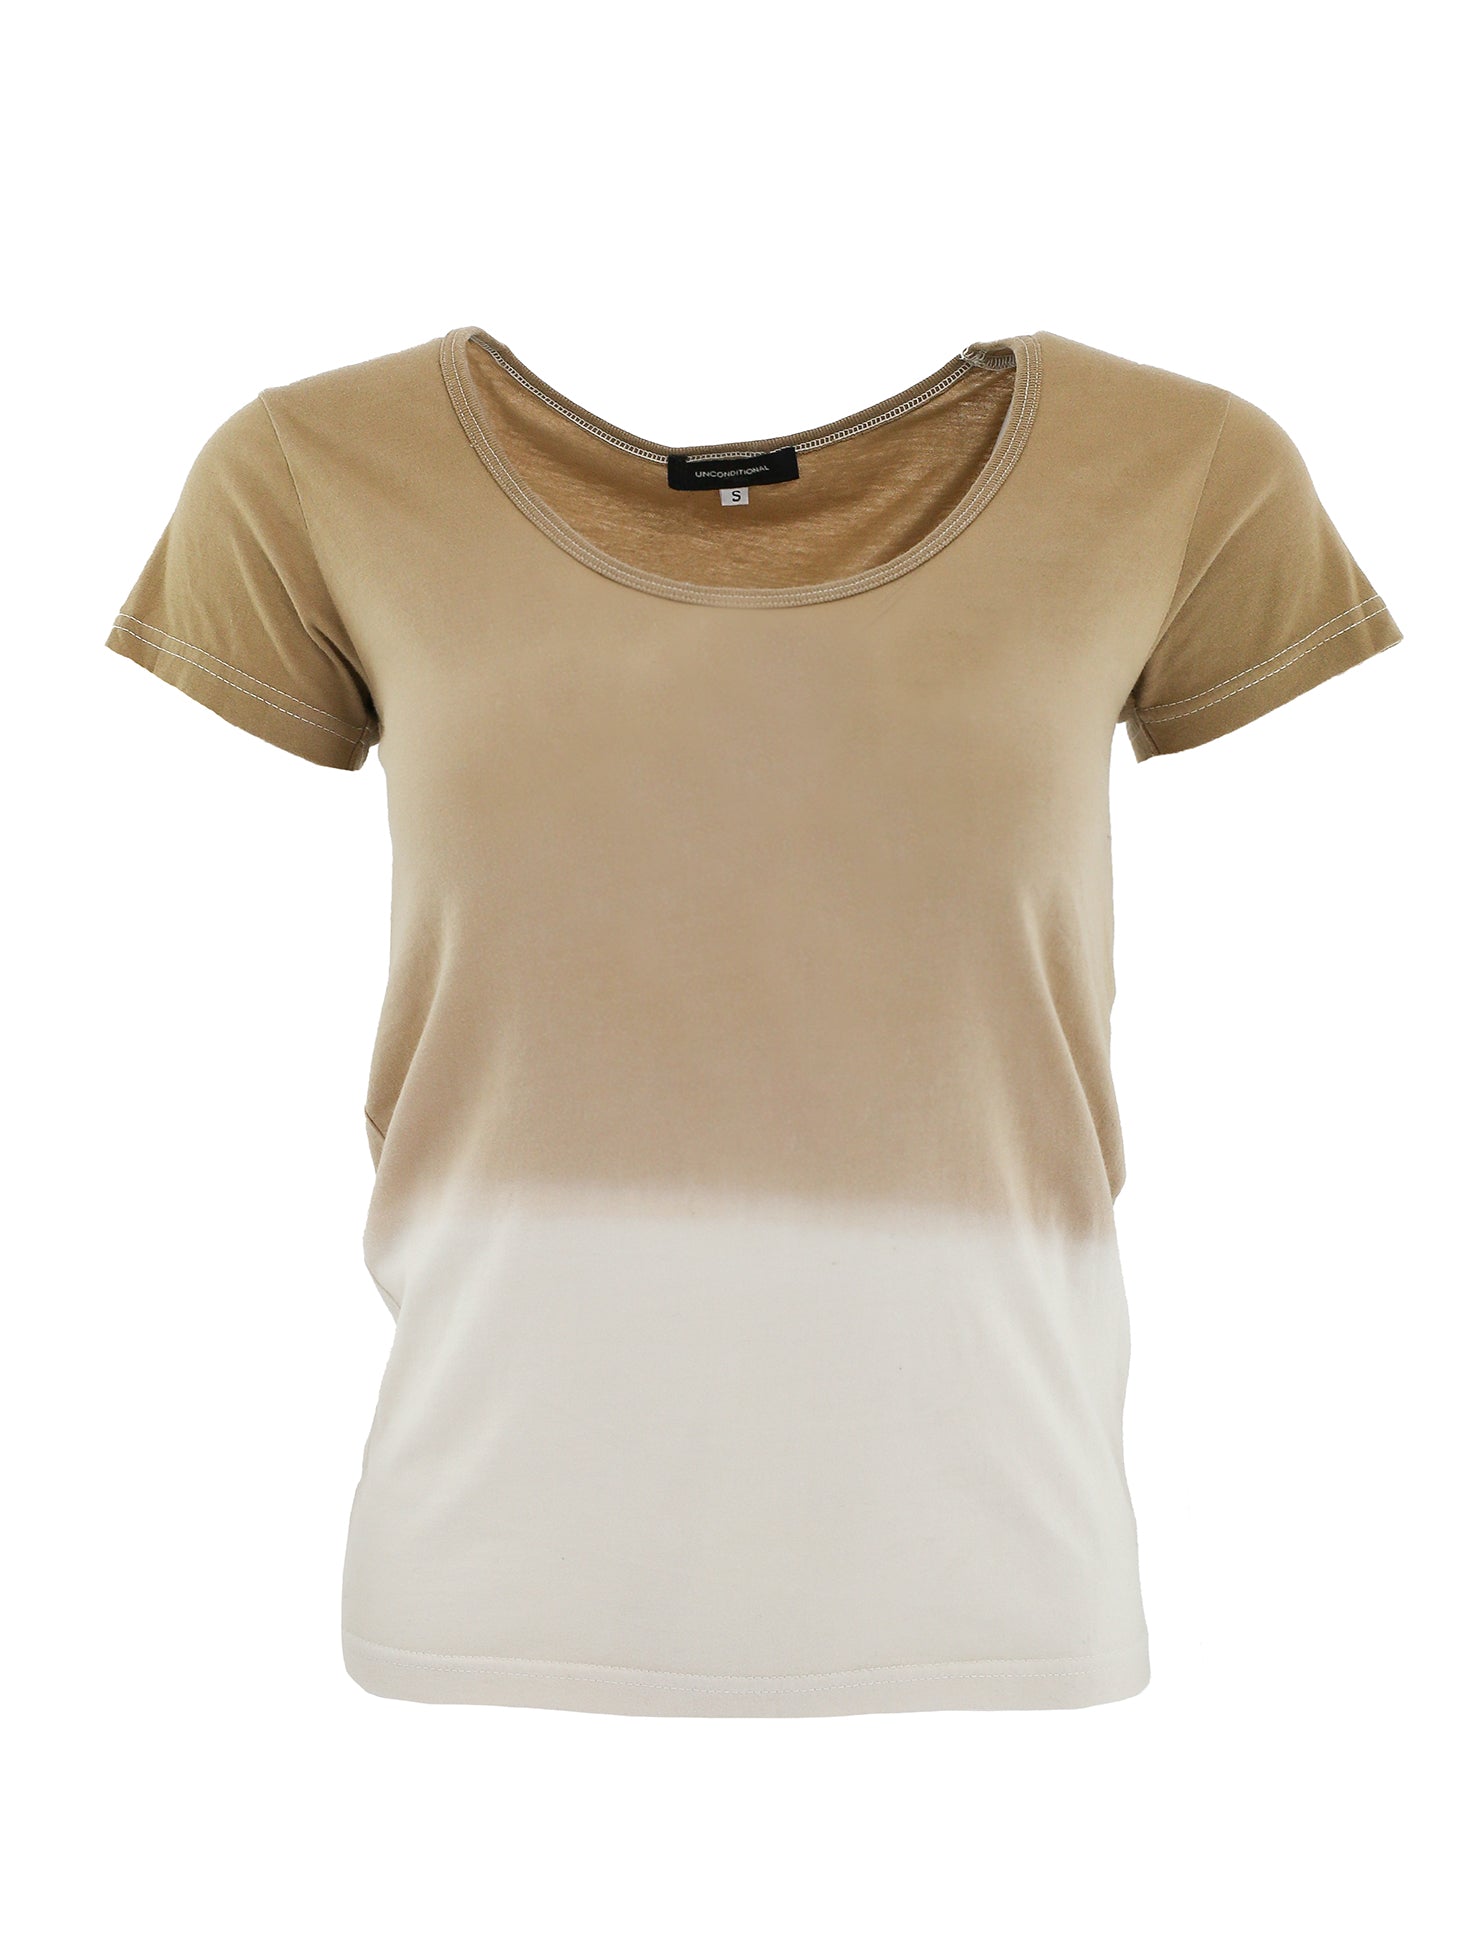 BROWN AND WHITE OMBRE T-SHIRT